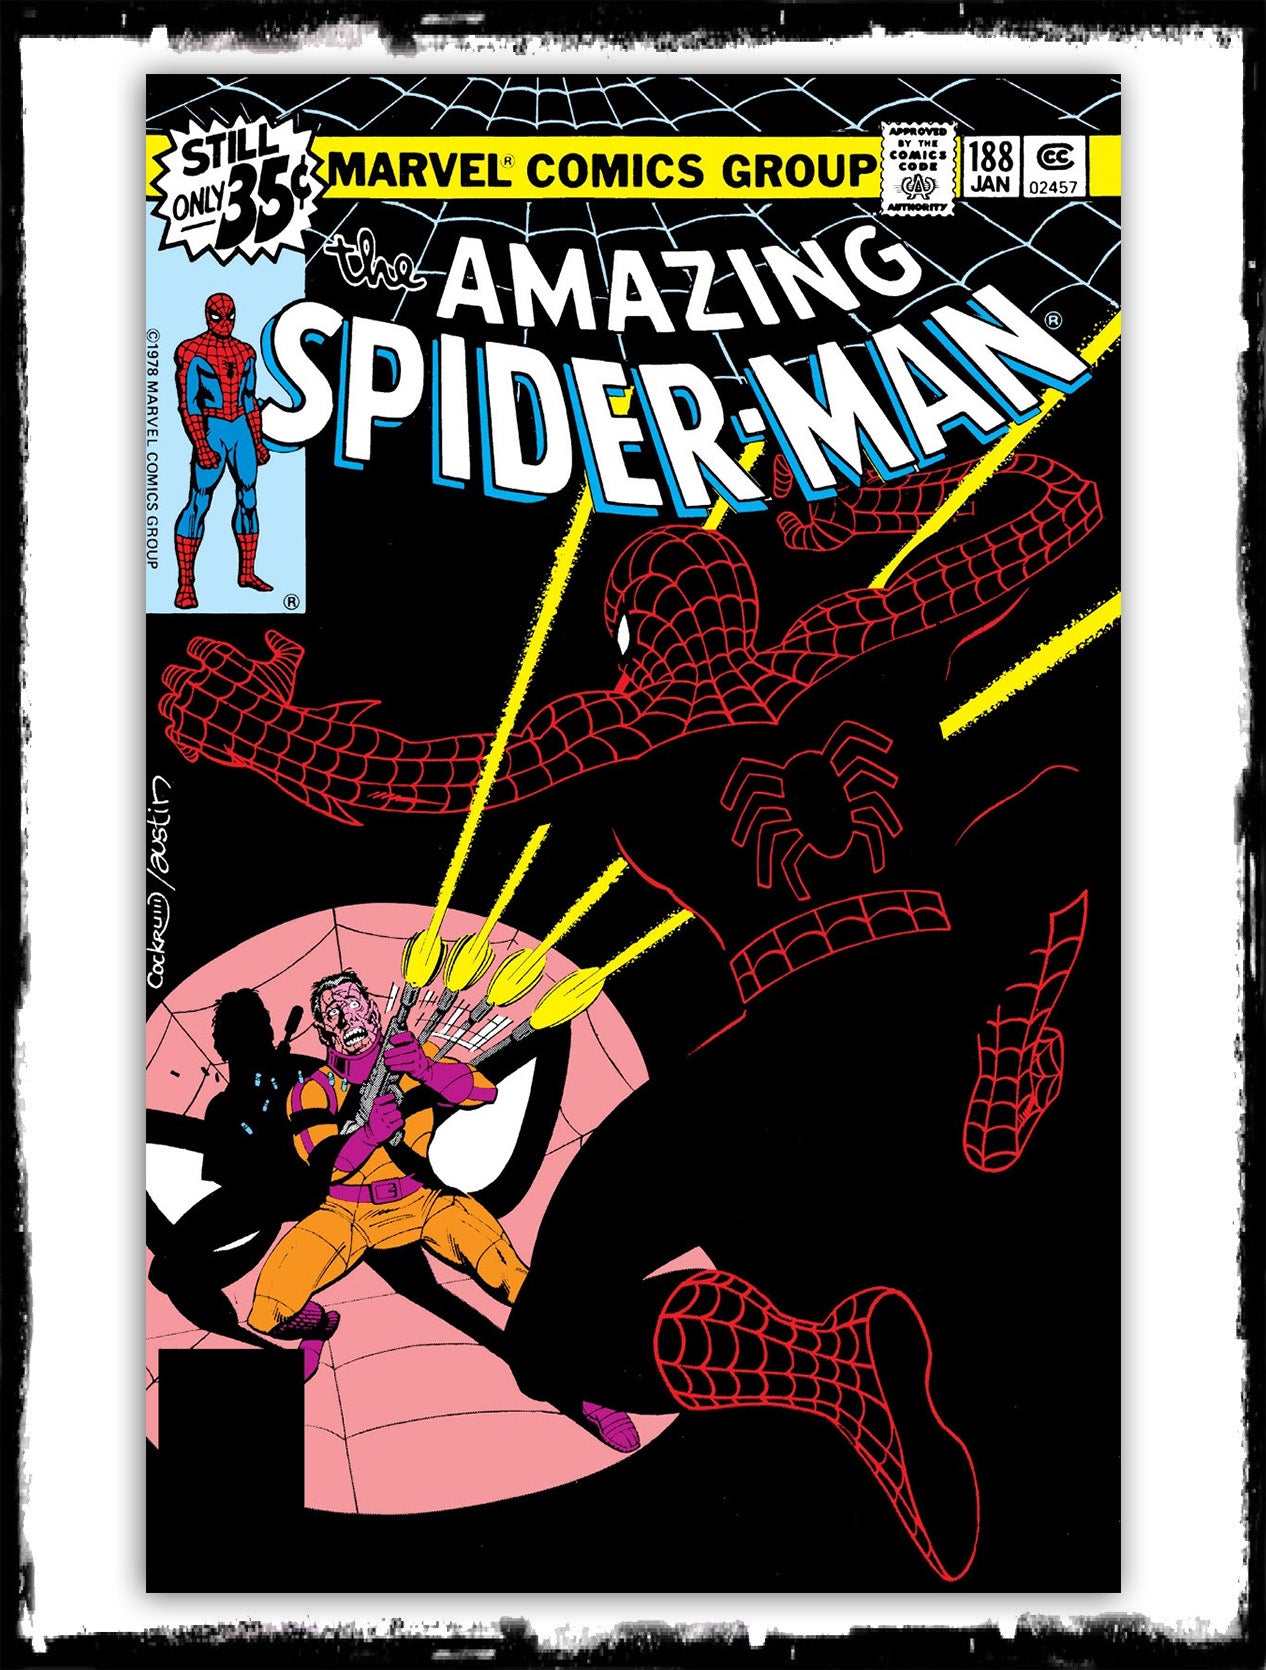 AMAZING SPIDER-MAN - #188 "THE JIGSAW IS UP!" (1979 - VF-)